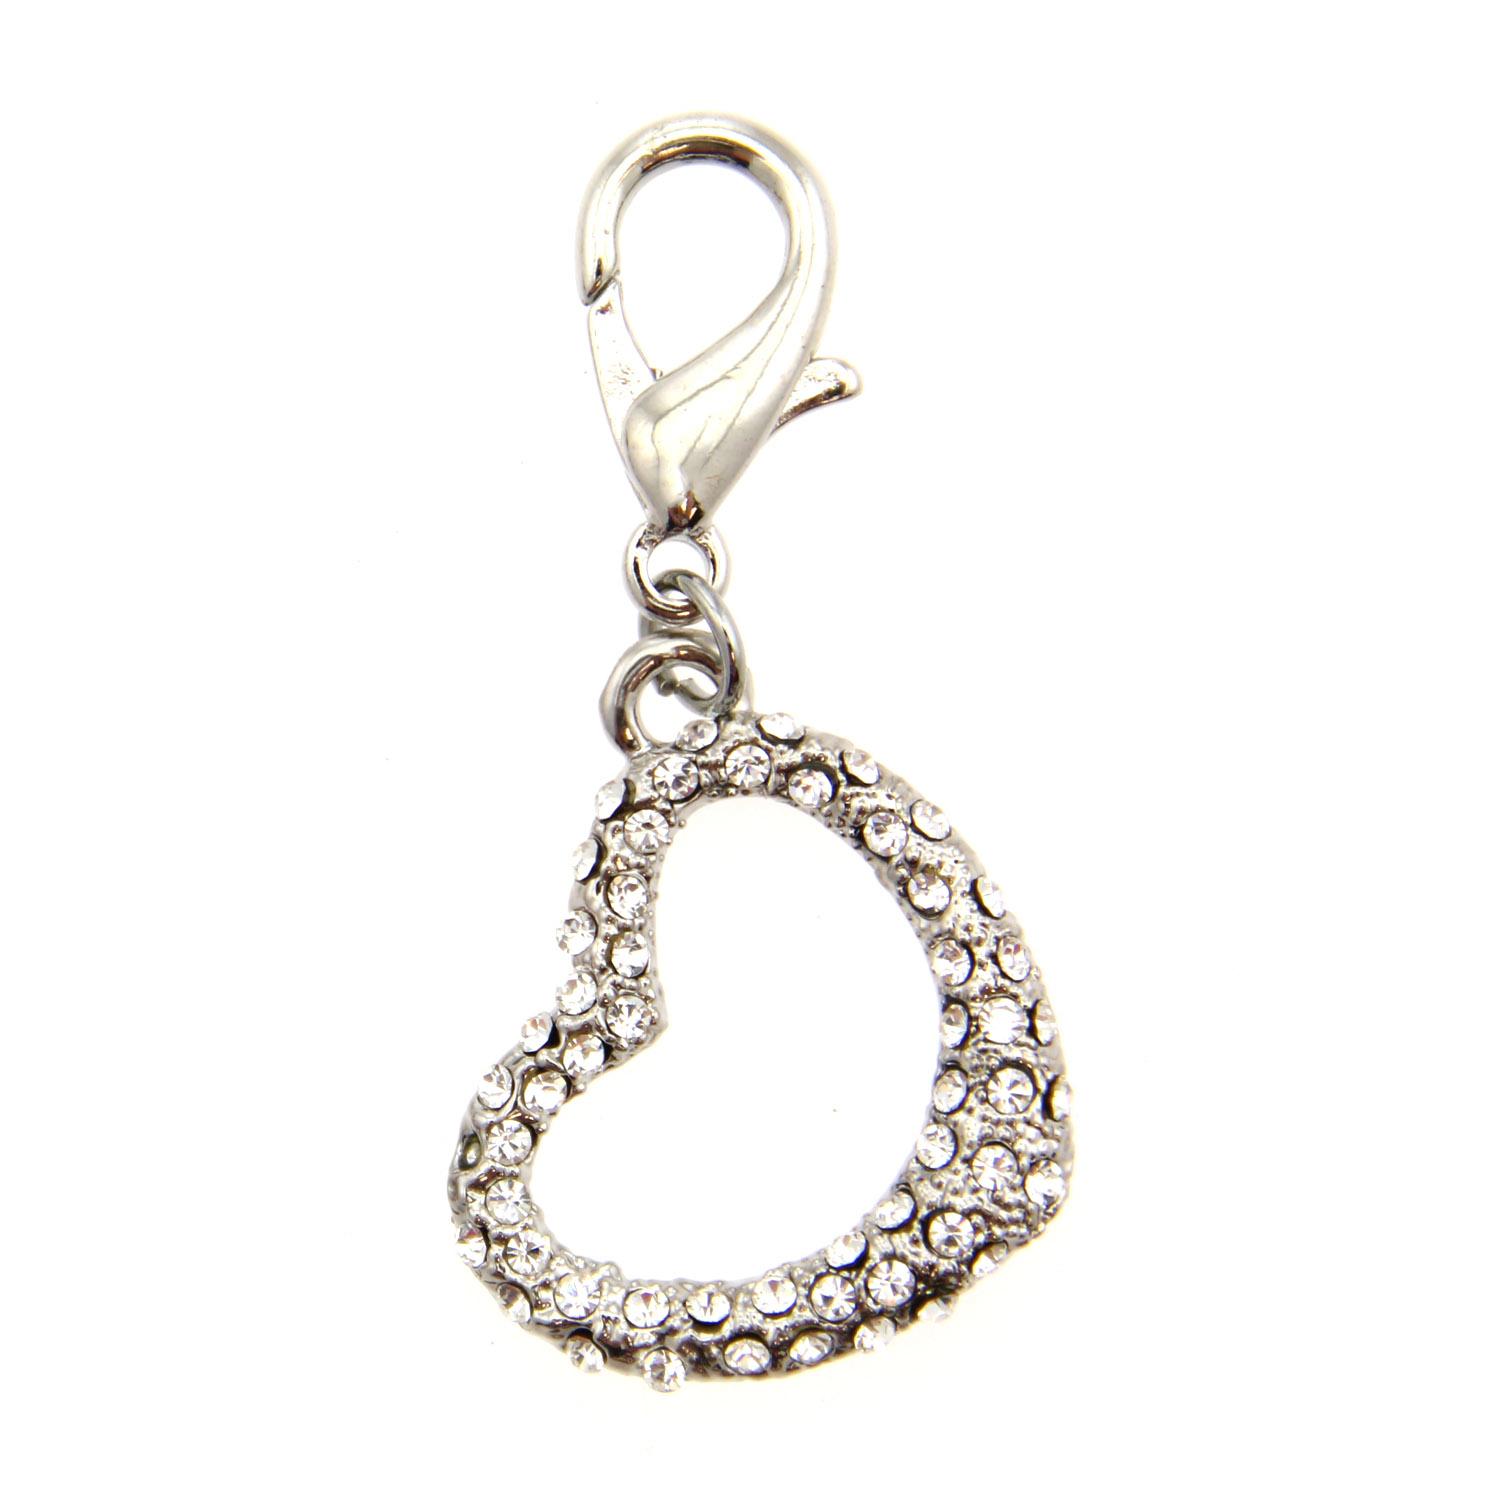 Tiff-Fou-Ny Heart D-Ring Pet Collar Charm by FouFou Dog - Clear